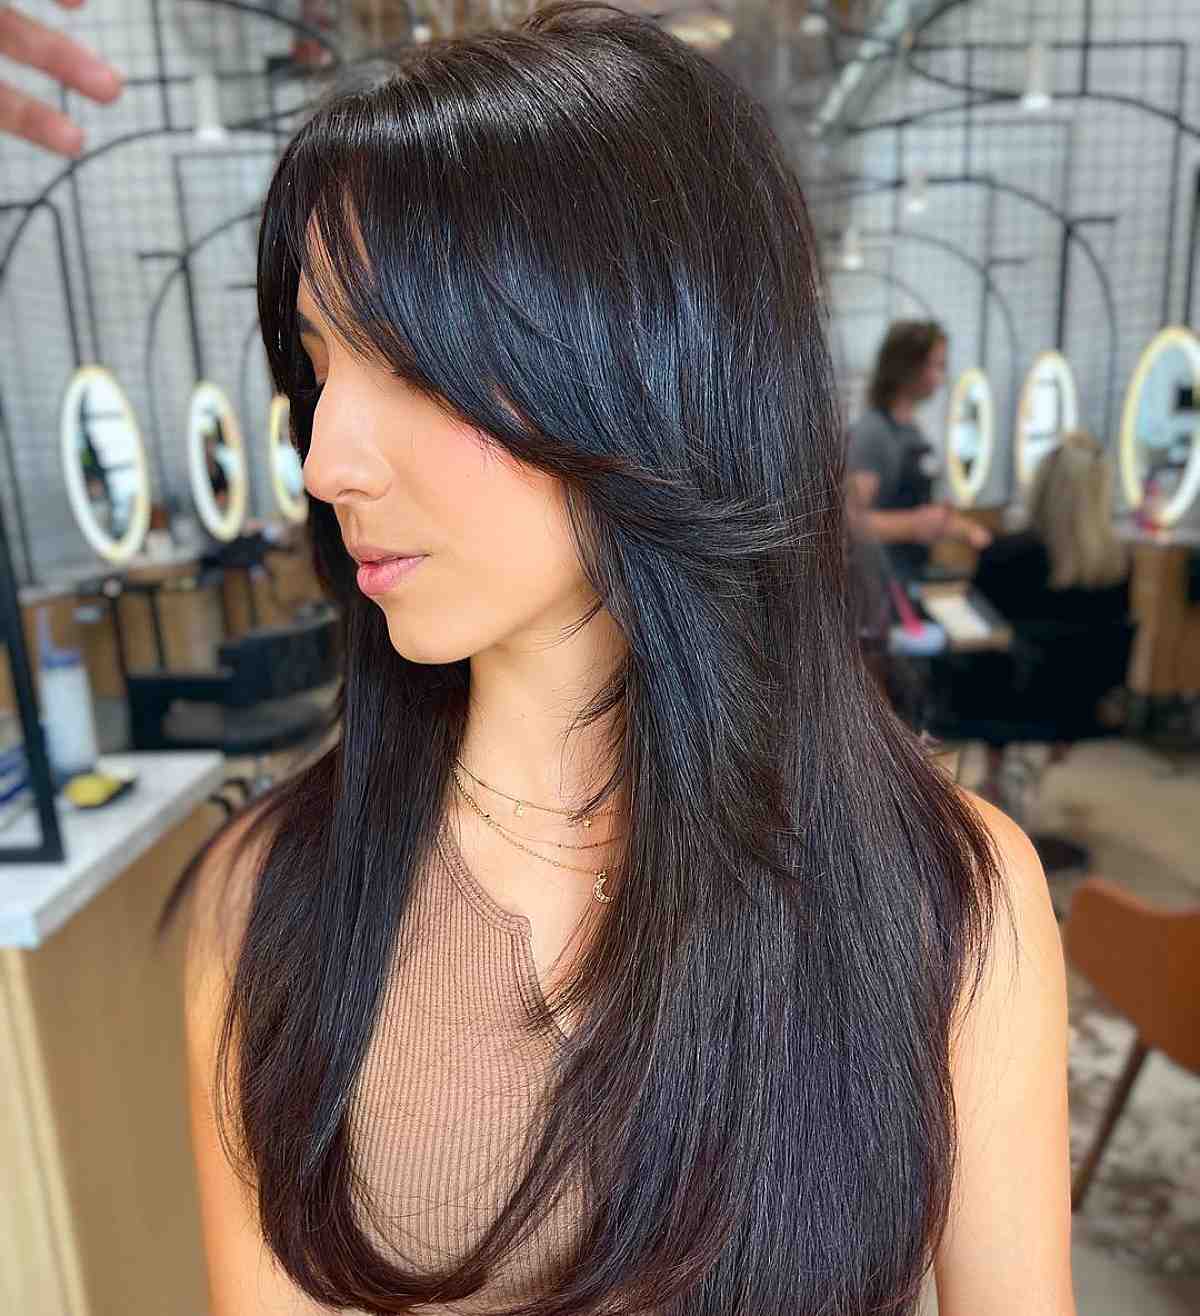 43 Stylish Feathered Hair Cuts for All Lengths - StayGlam